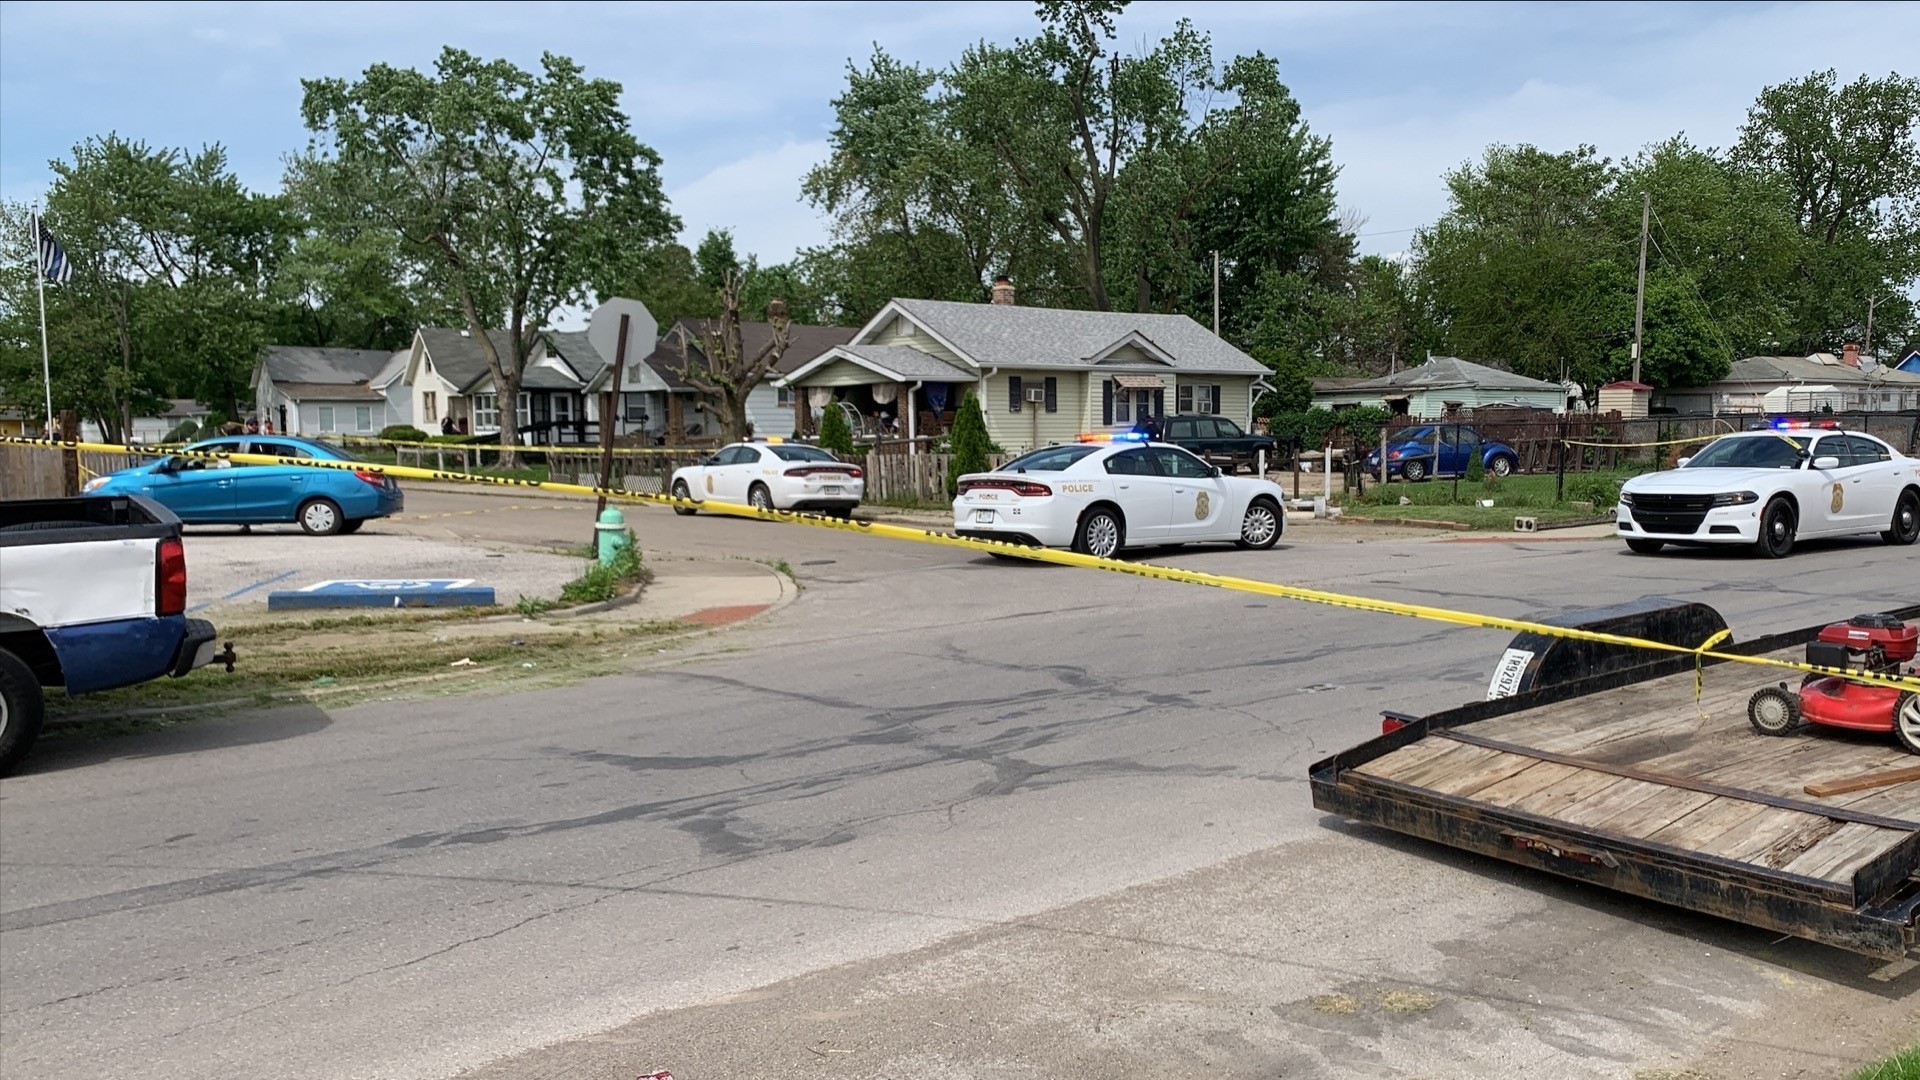 The shooting happened Sunday afternoon in the 1600 block of Harlan Street, which is near the intersection of East Pleasant Run Parkway and South Keystone Avenue.